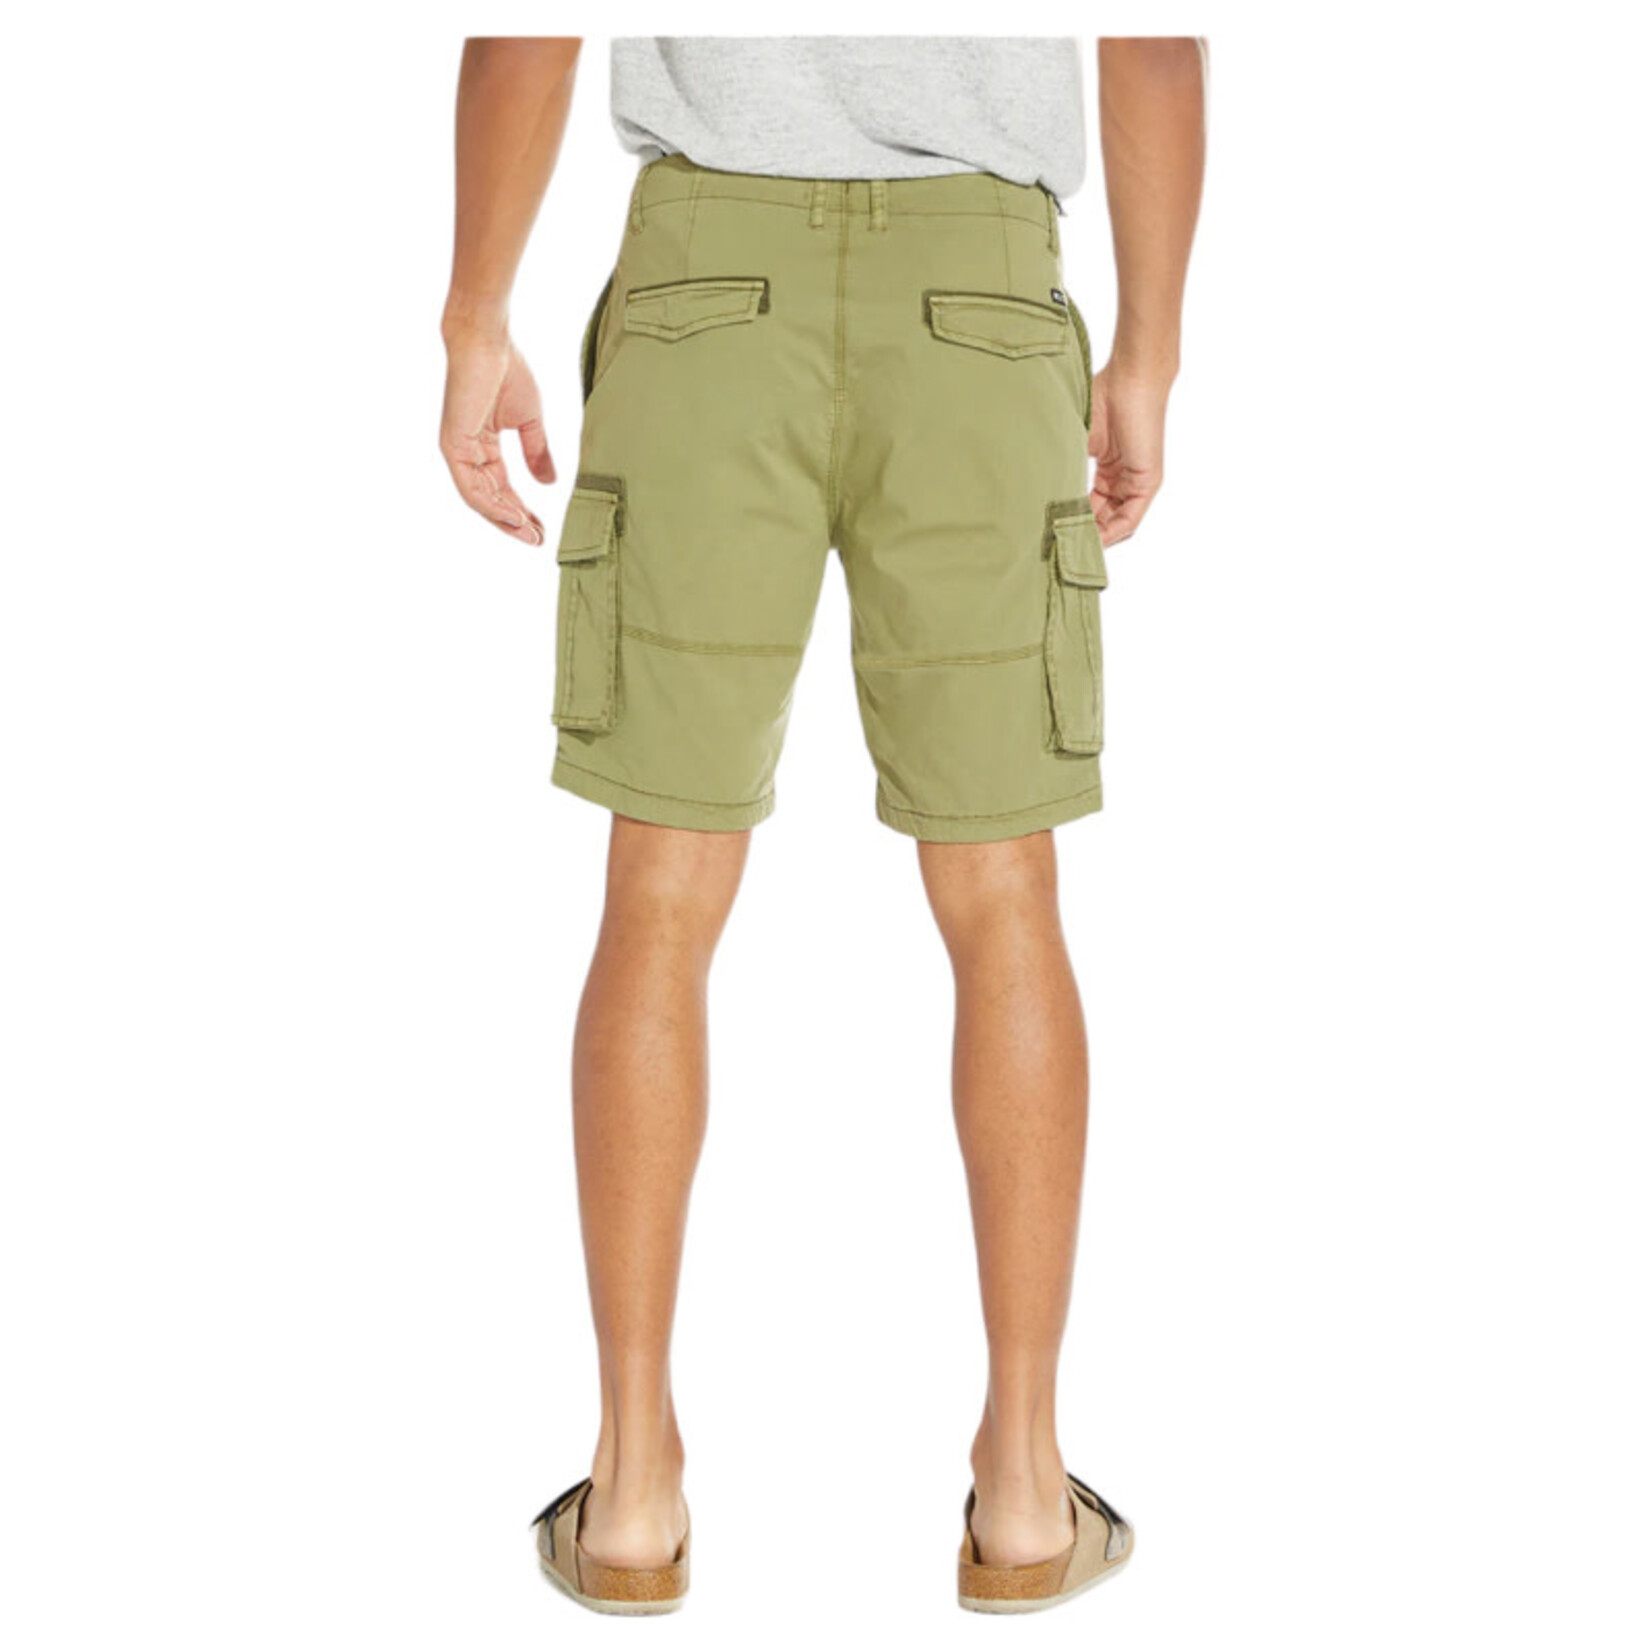 MICROS MICROS CLASSIC FIT CARGO SHORTS MZXS-6636